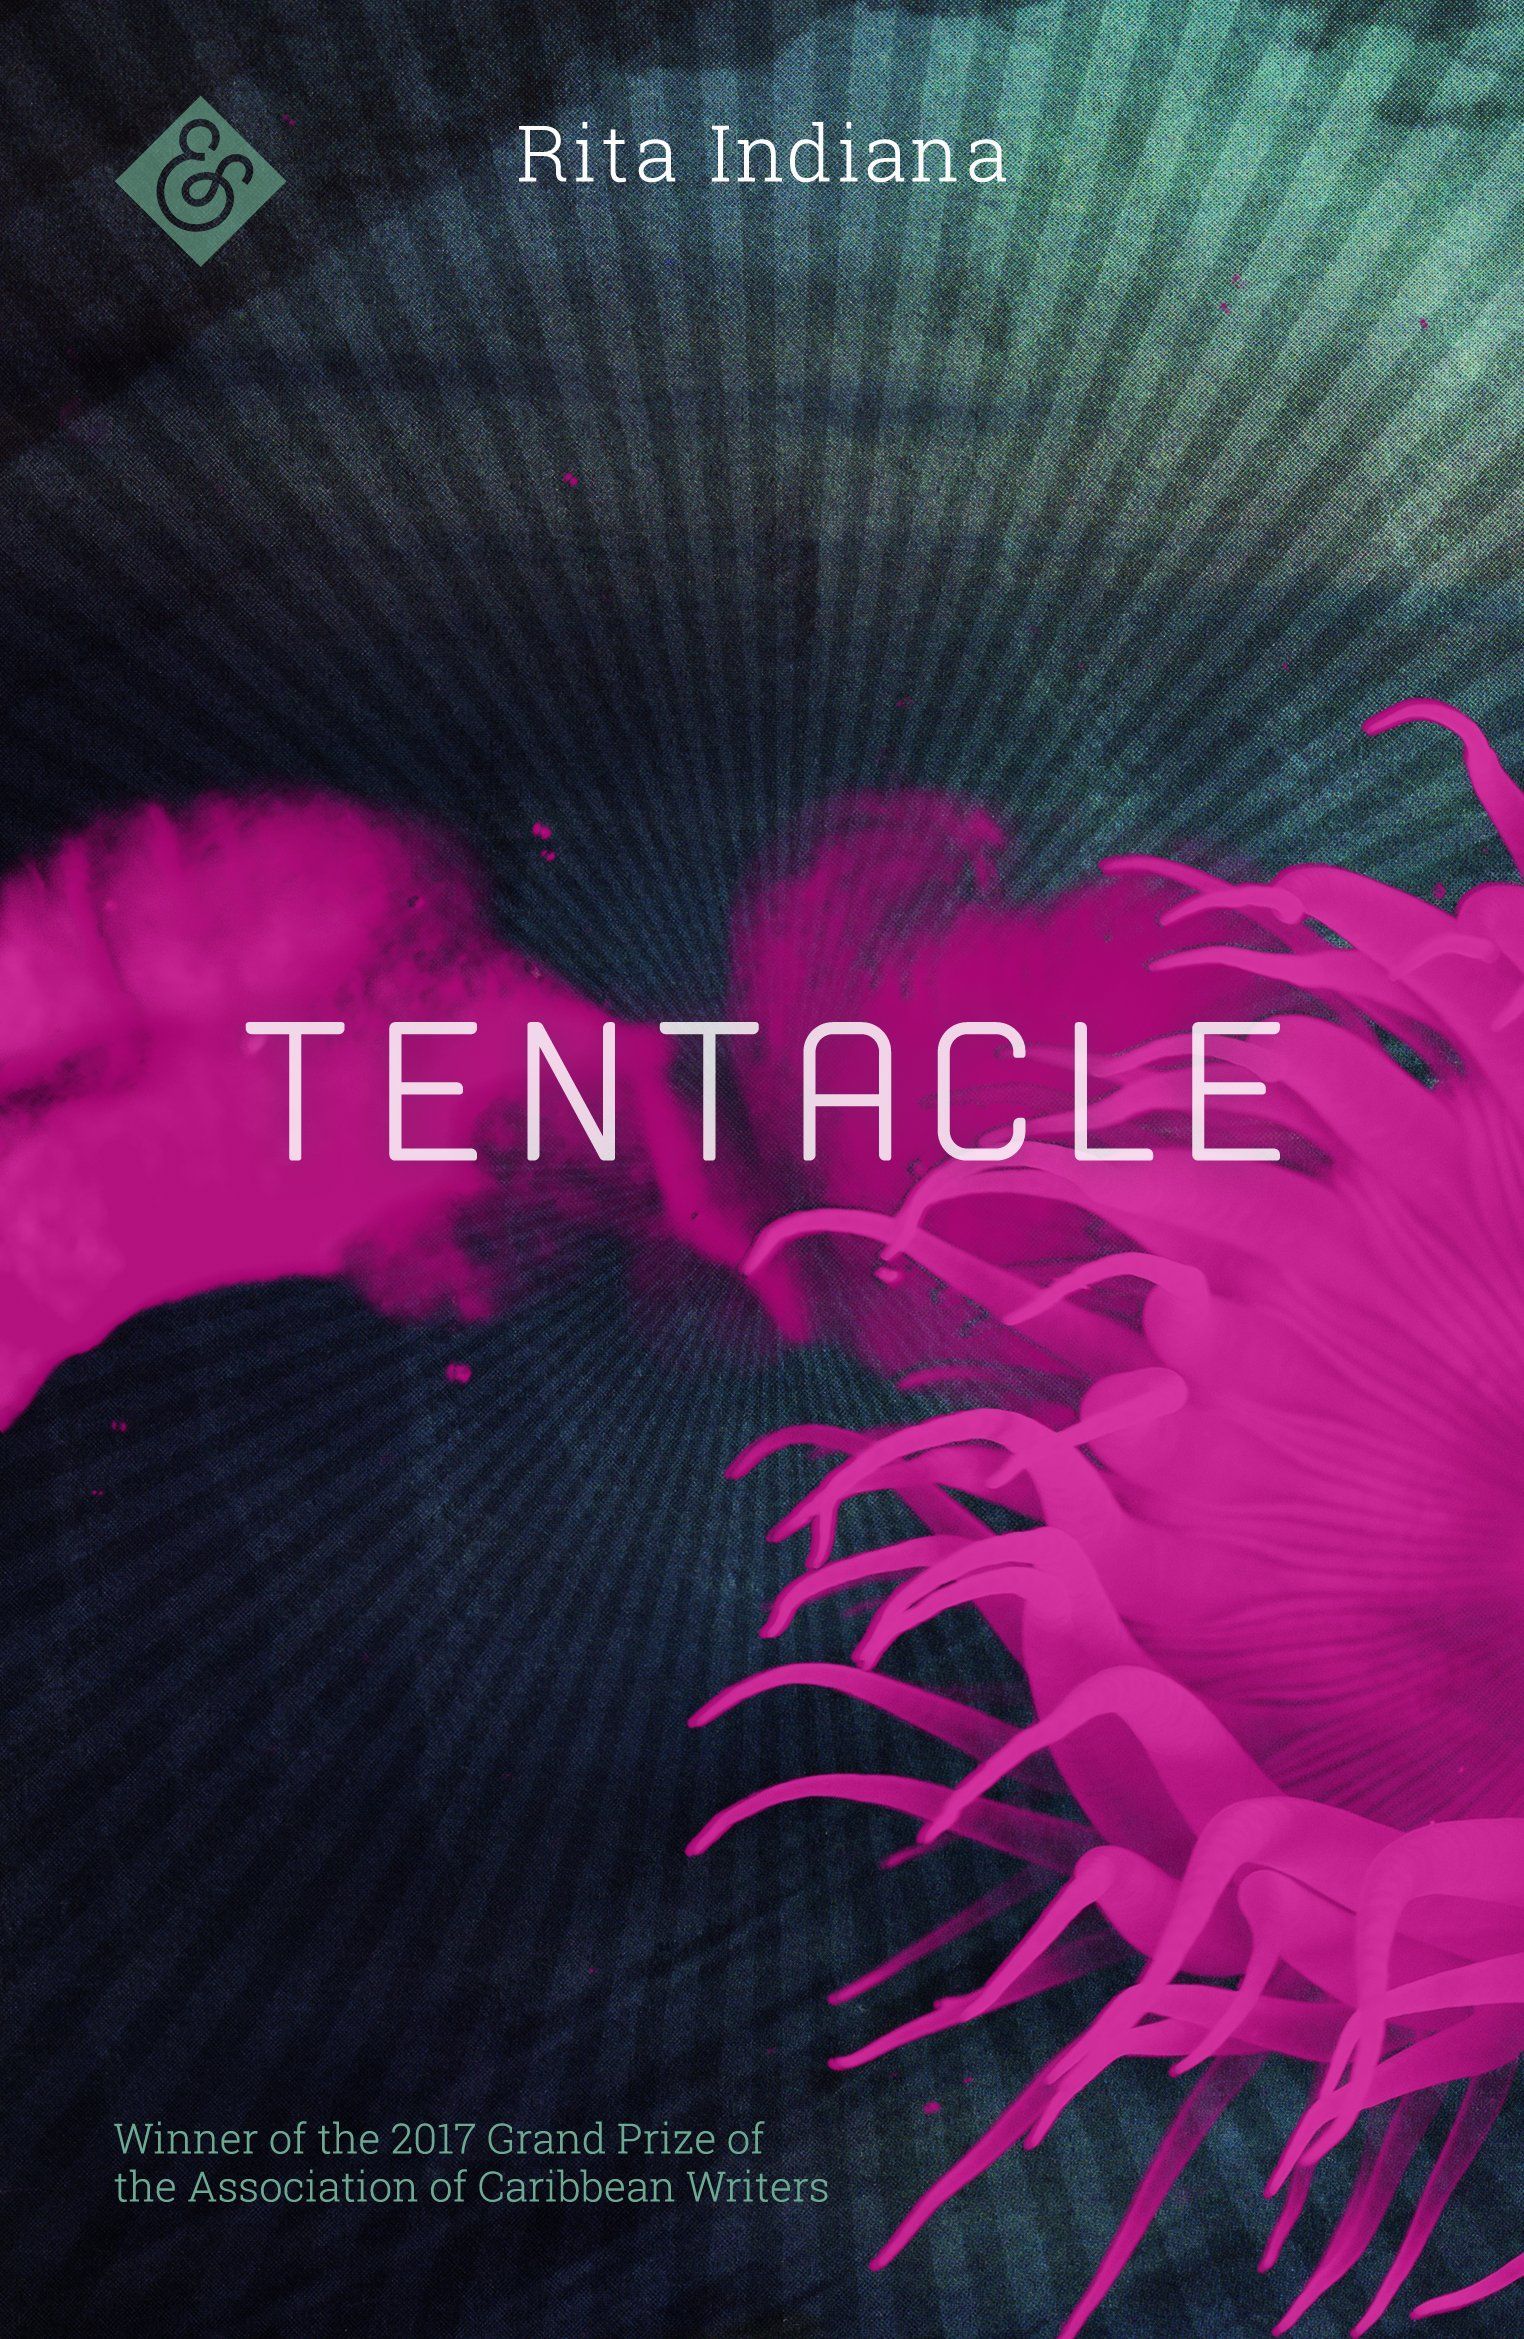 A Future That Rests with the Fate of the Oppressed: On Rita Indiana’s “Tentacle”